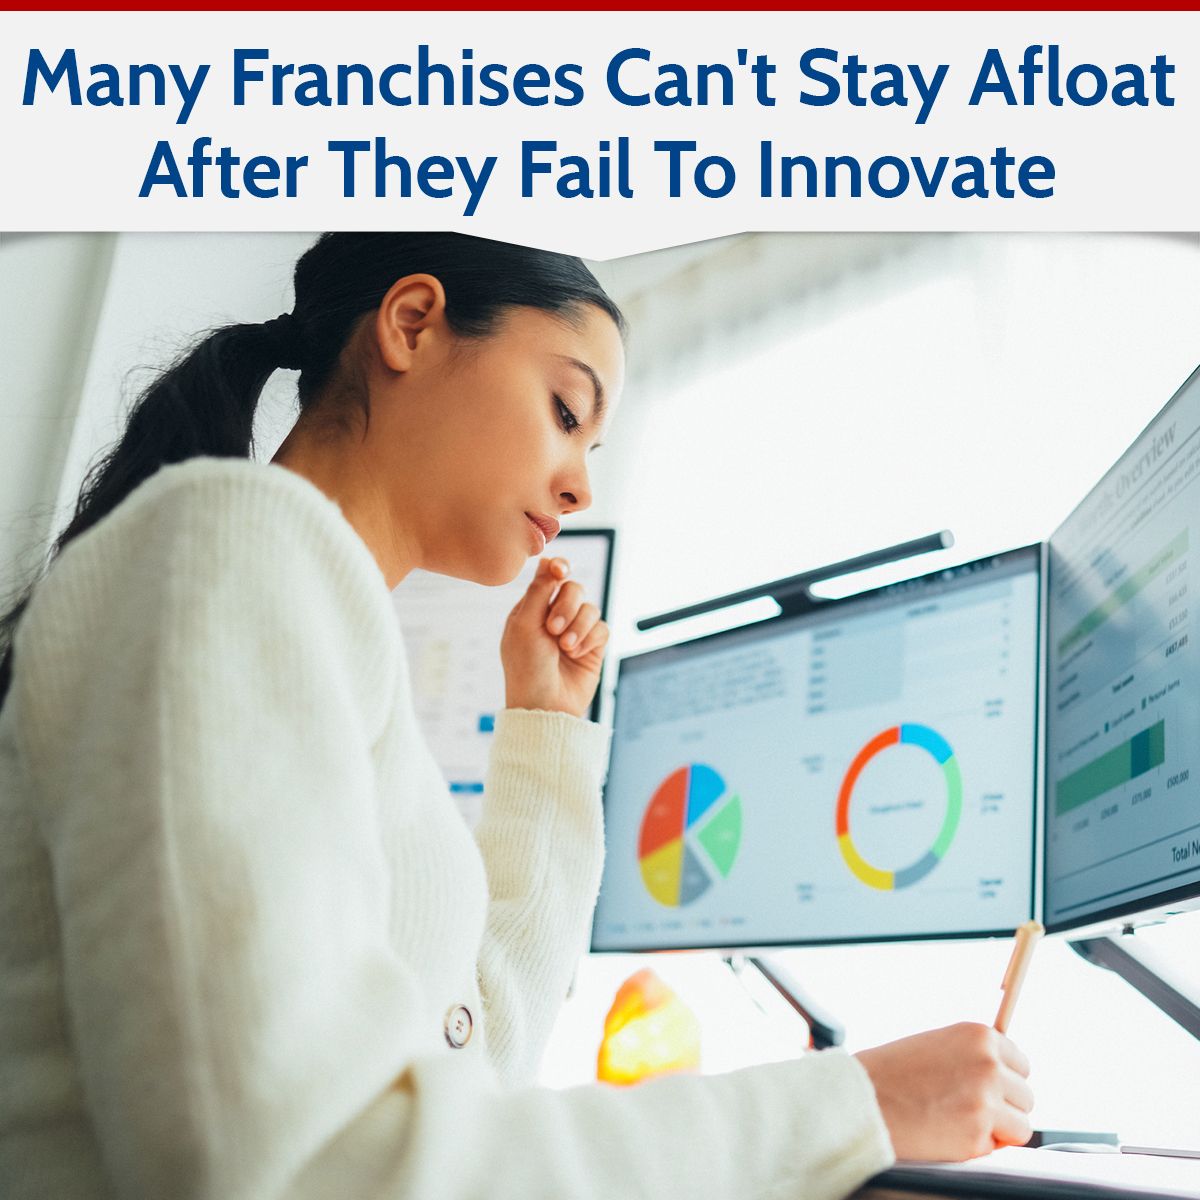 Many Franchises Can't Stay Afloat After They Fail To Innovate